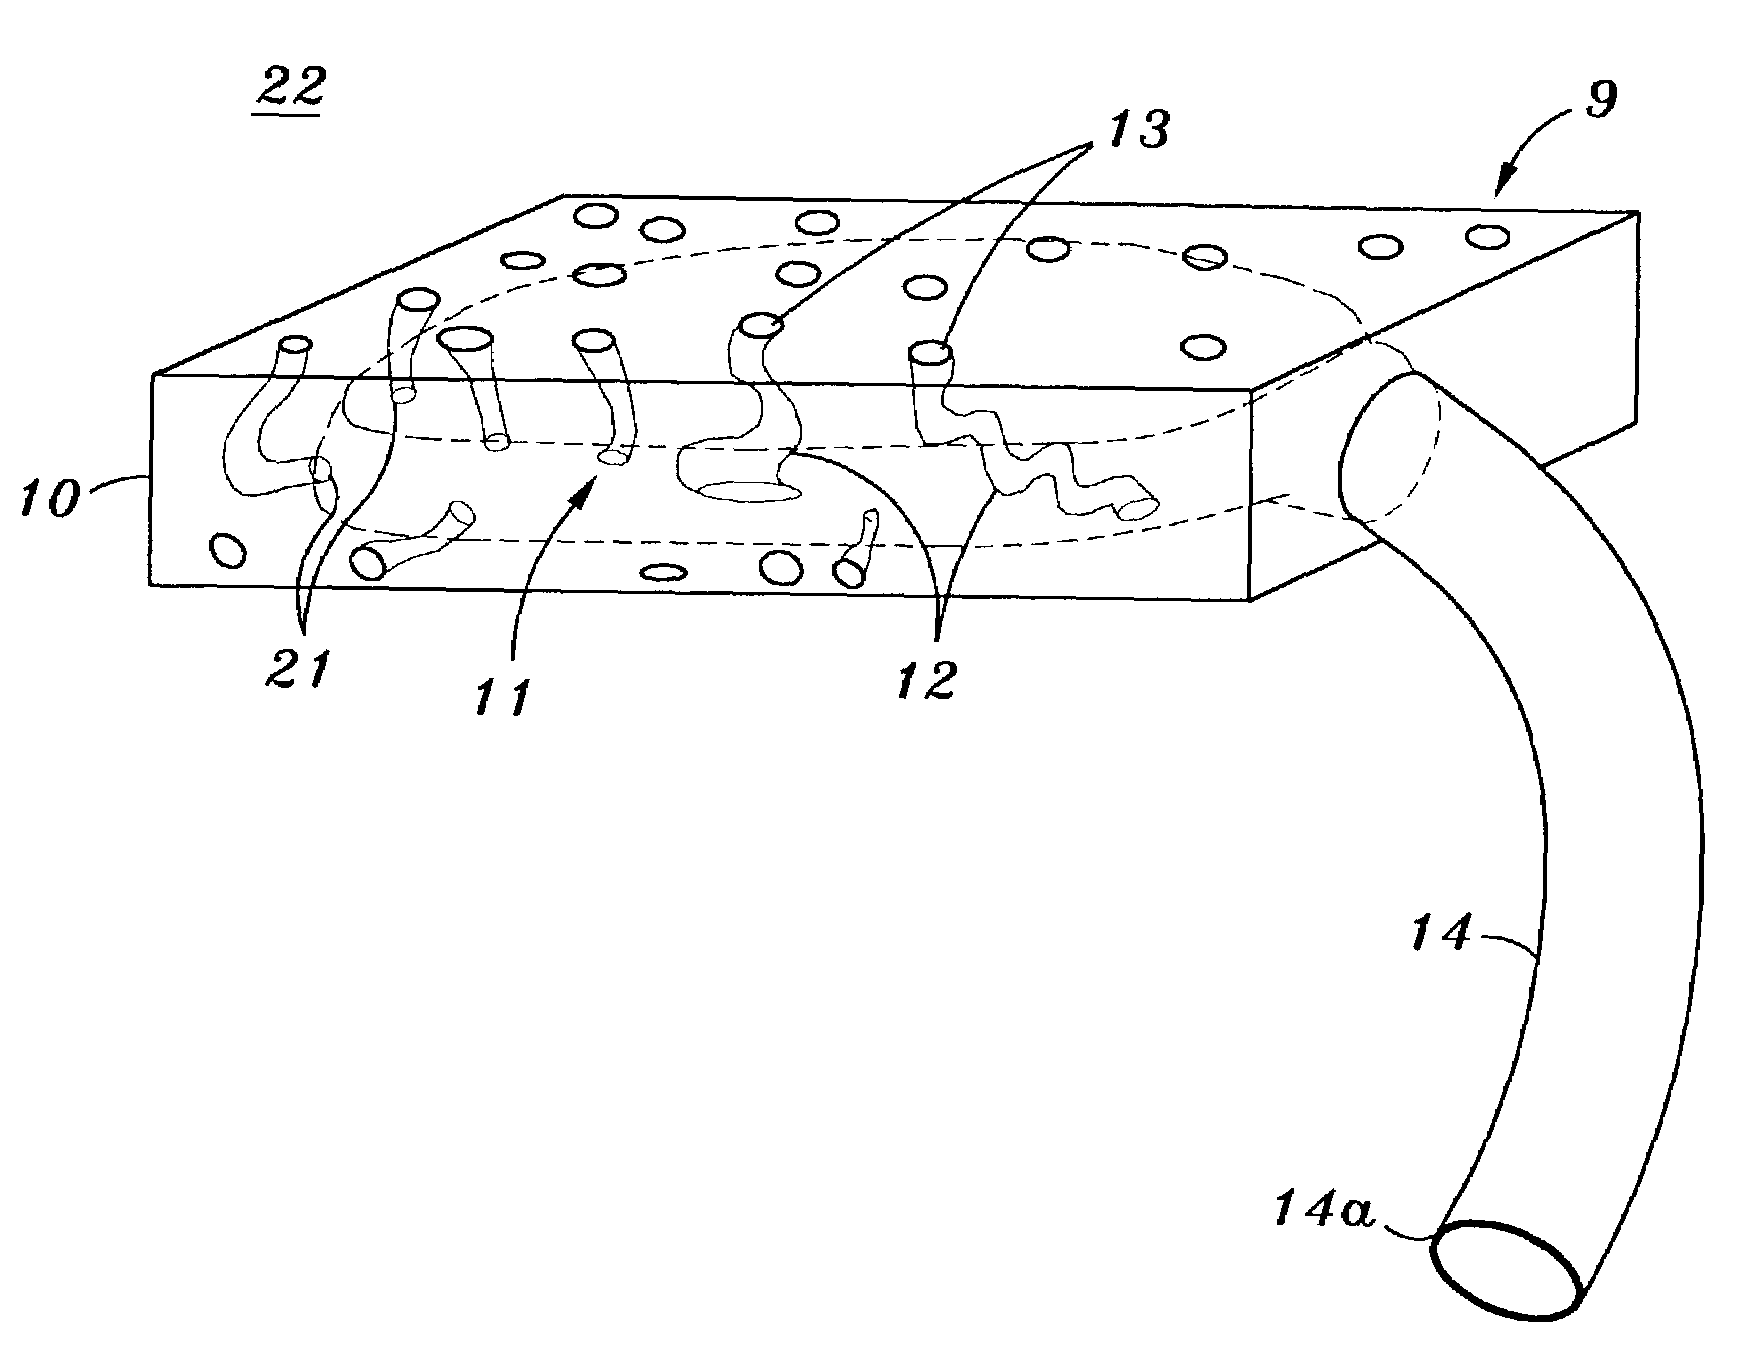 Time-released substance delivery device